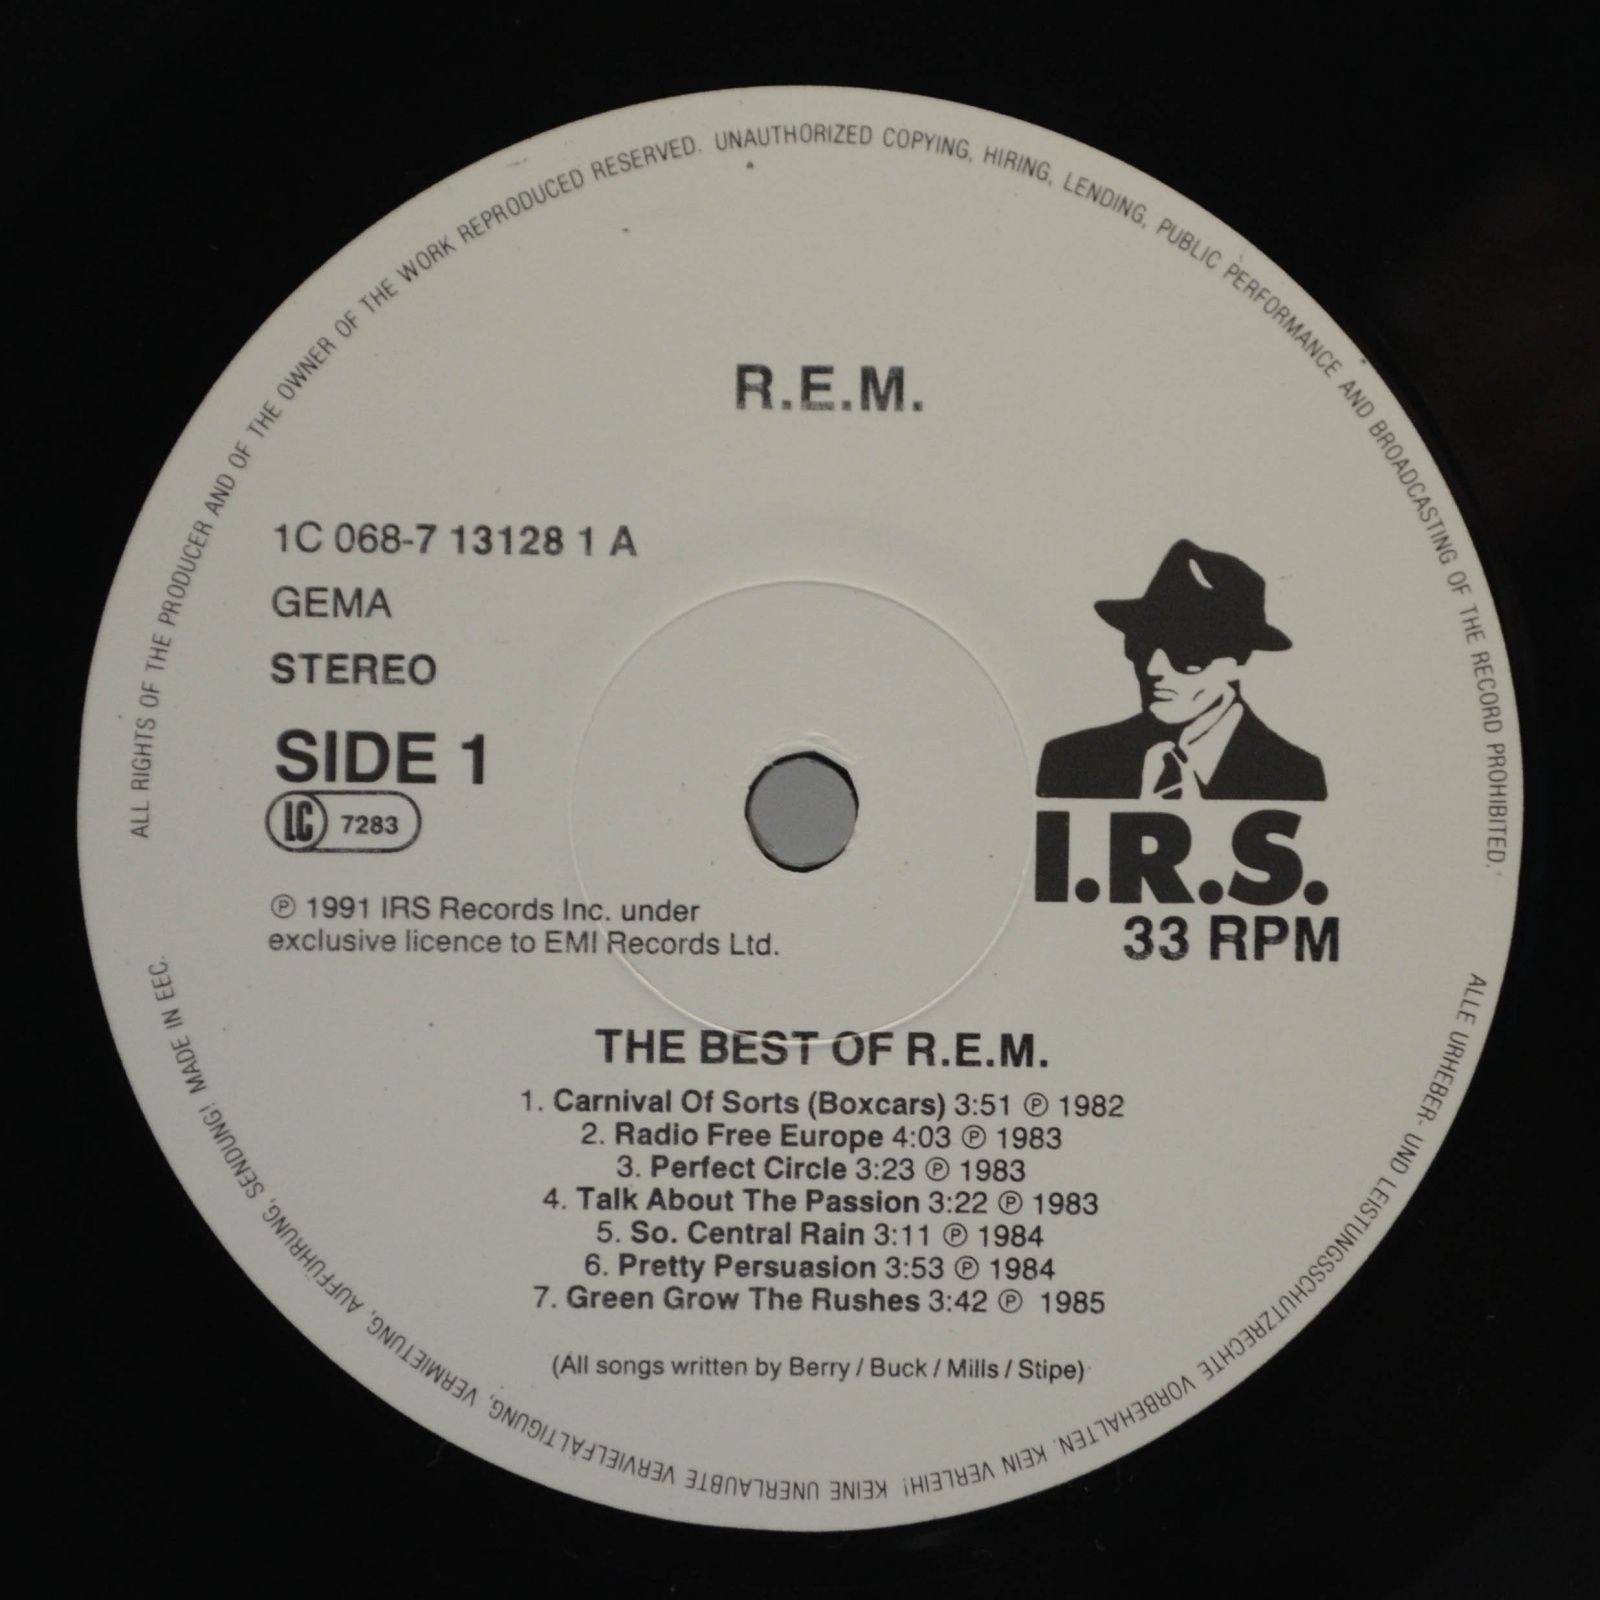 R.E.M. — The Best Of, 1991